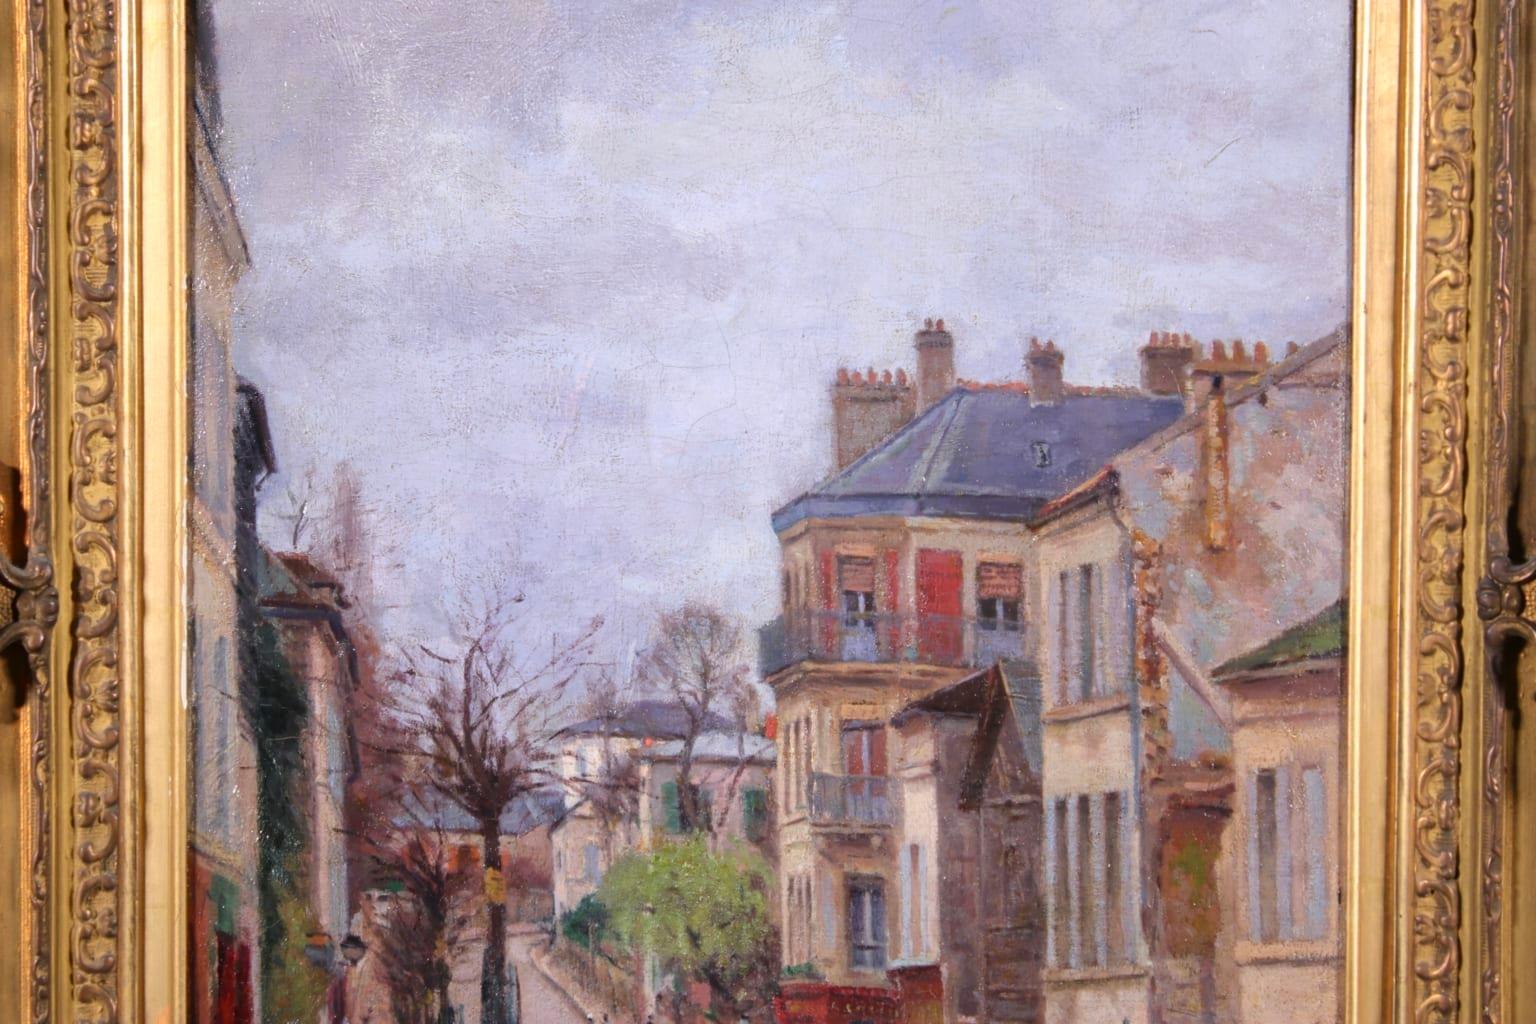 Montmartre - Impressionist Oil, Figures in Street Landscape by Victor Vignon - Gray Figurative Painting by Victor Alfred Paul Vignon